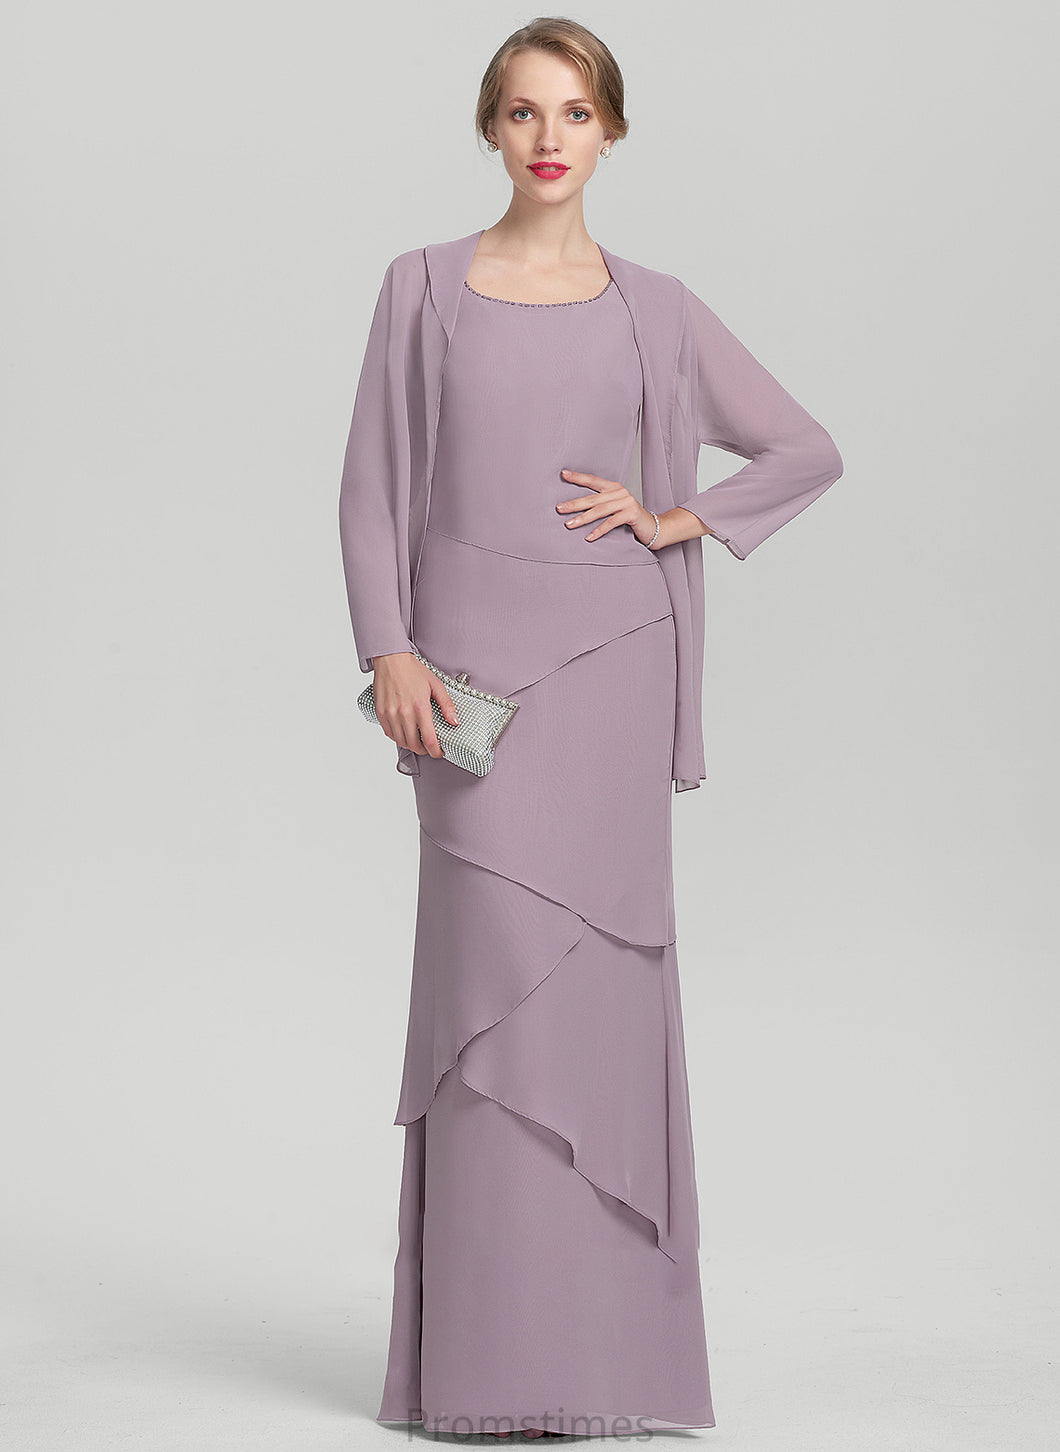 Scoop Ruffles Sheath/Column Amari Mother of the Bride Dresses Bride With Mother Dress Floor-Length Chiffon Cascading Beading of the Neck